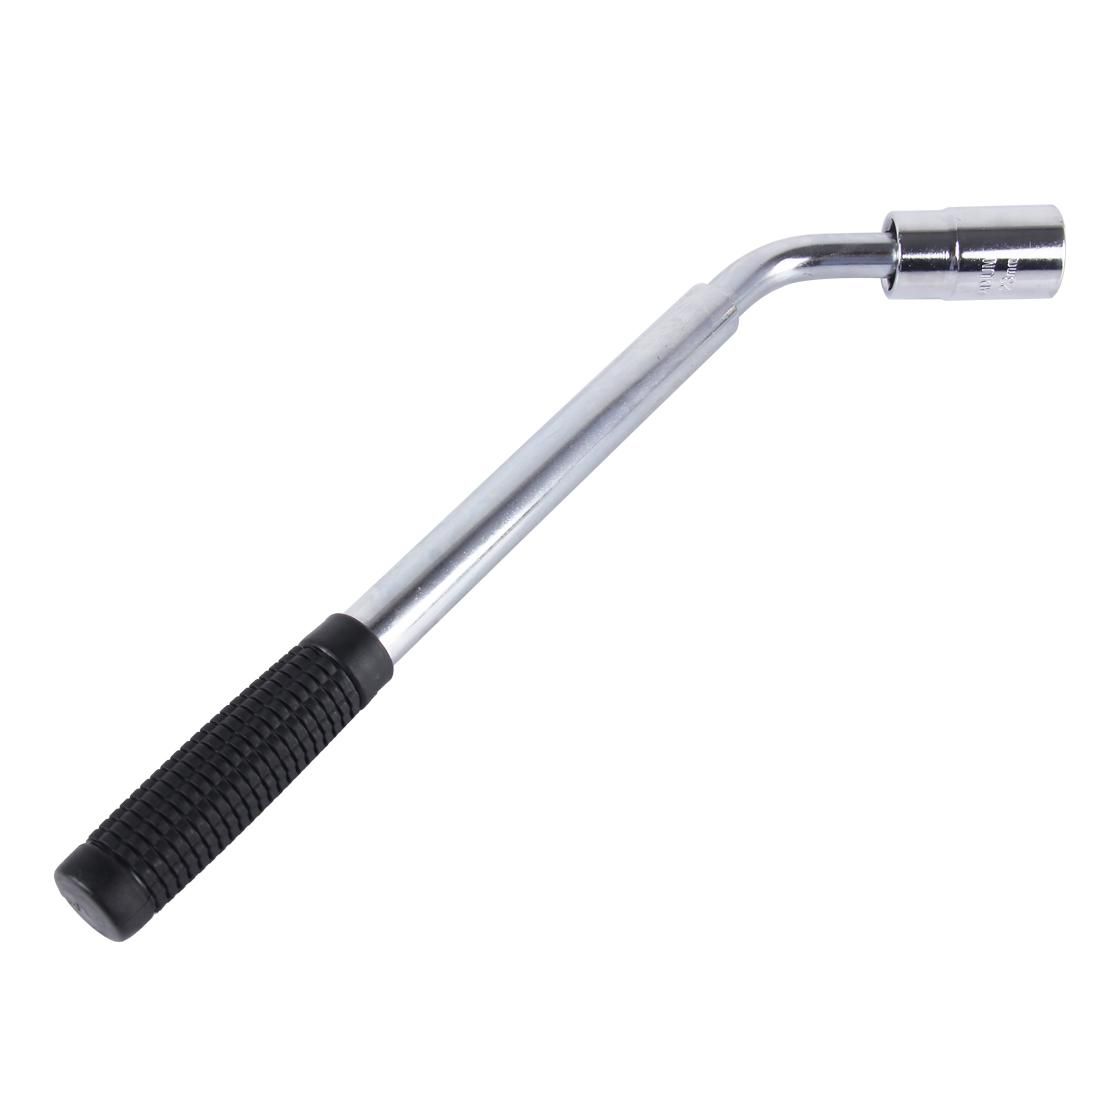 Telescoping Wheel Lug Wrench with Reversible 17mm & 19mm, 21mm & 23mm Socket Adapters And Extended Nonslip Handle from 14.4 inch to 20.5 inch